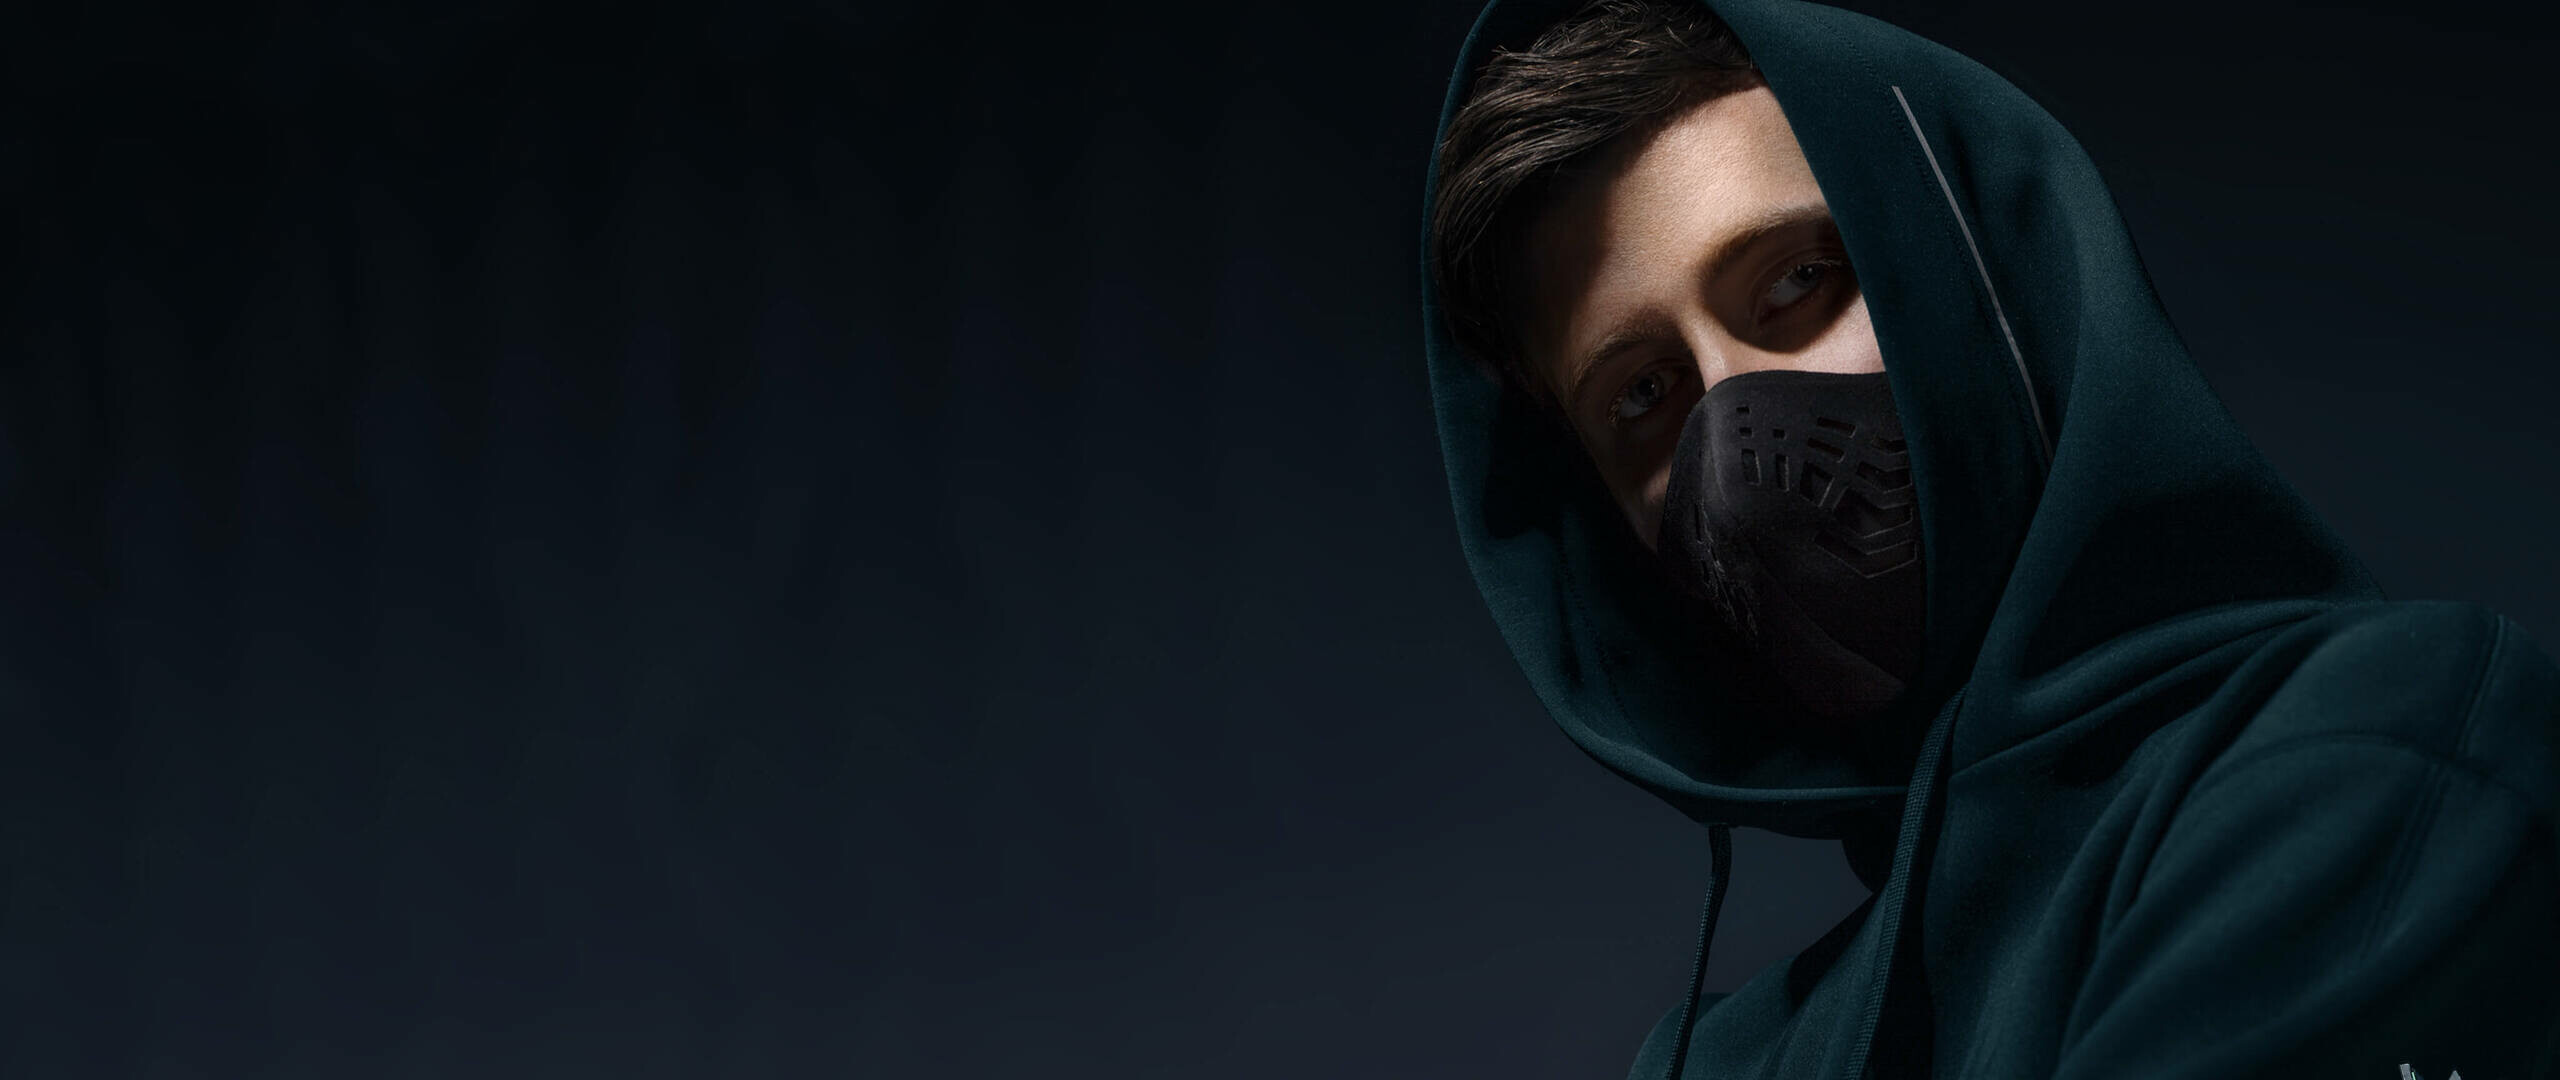 Alan Walker: One of few musicians that has surpassed one billion plays on YouTube, Faded. 2560x1080 Dual Screen Wallpaper.